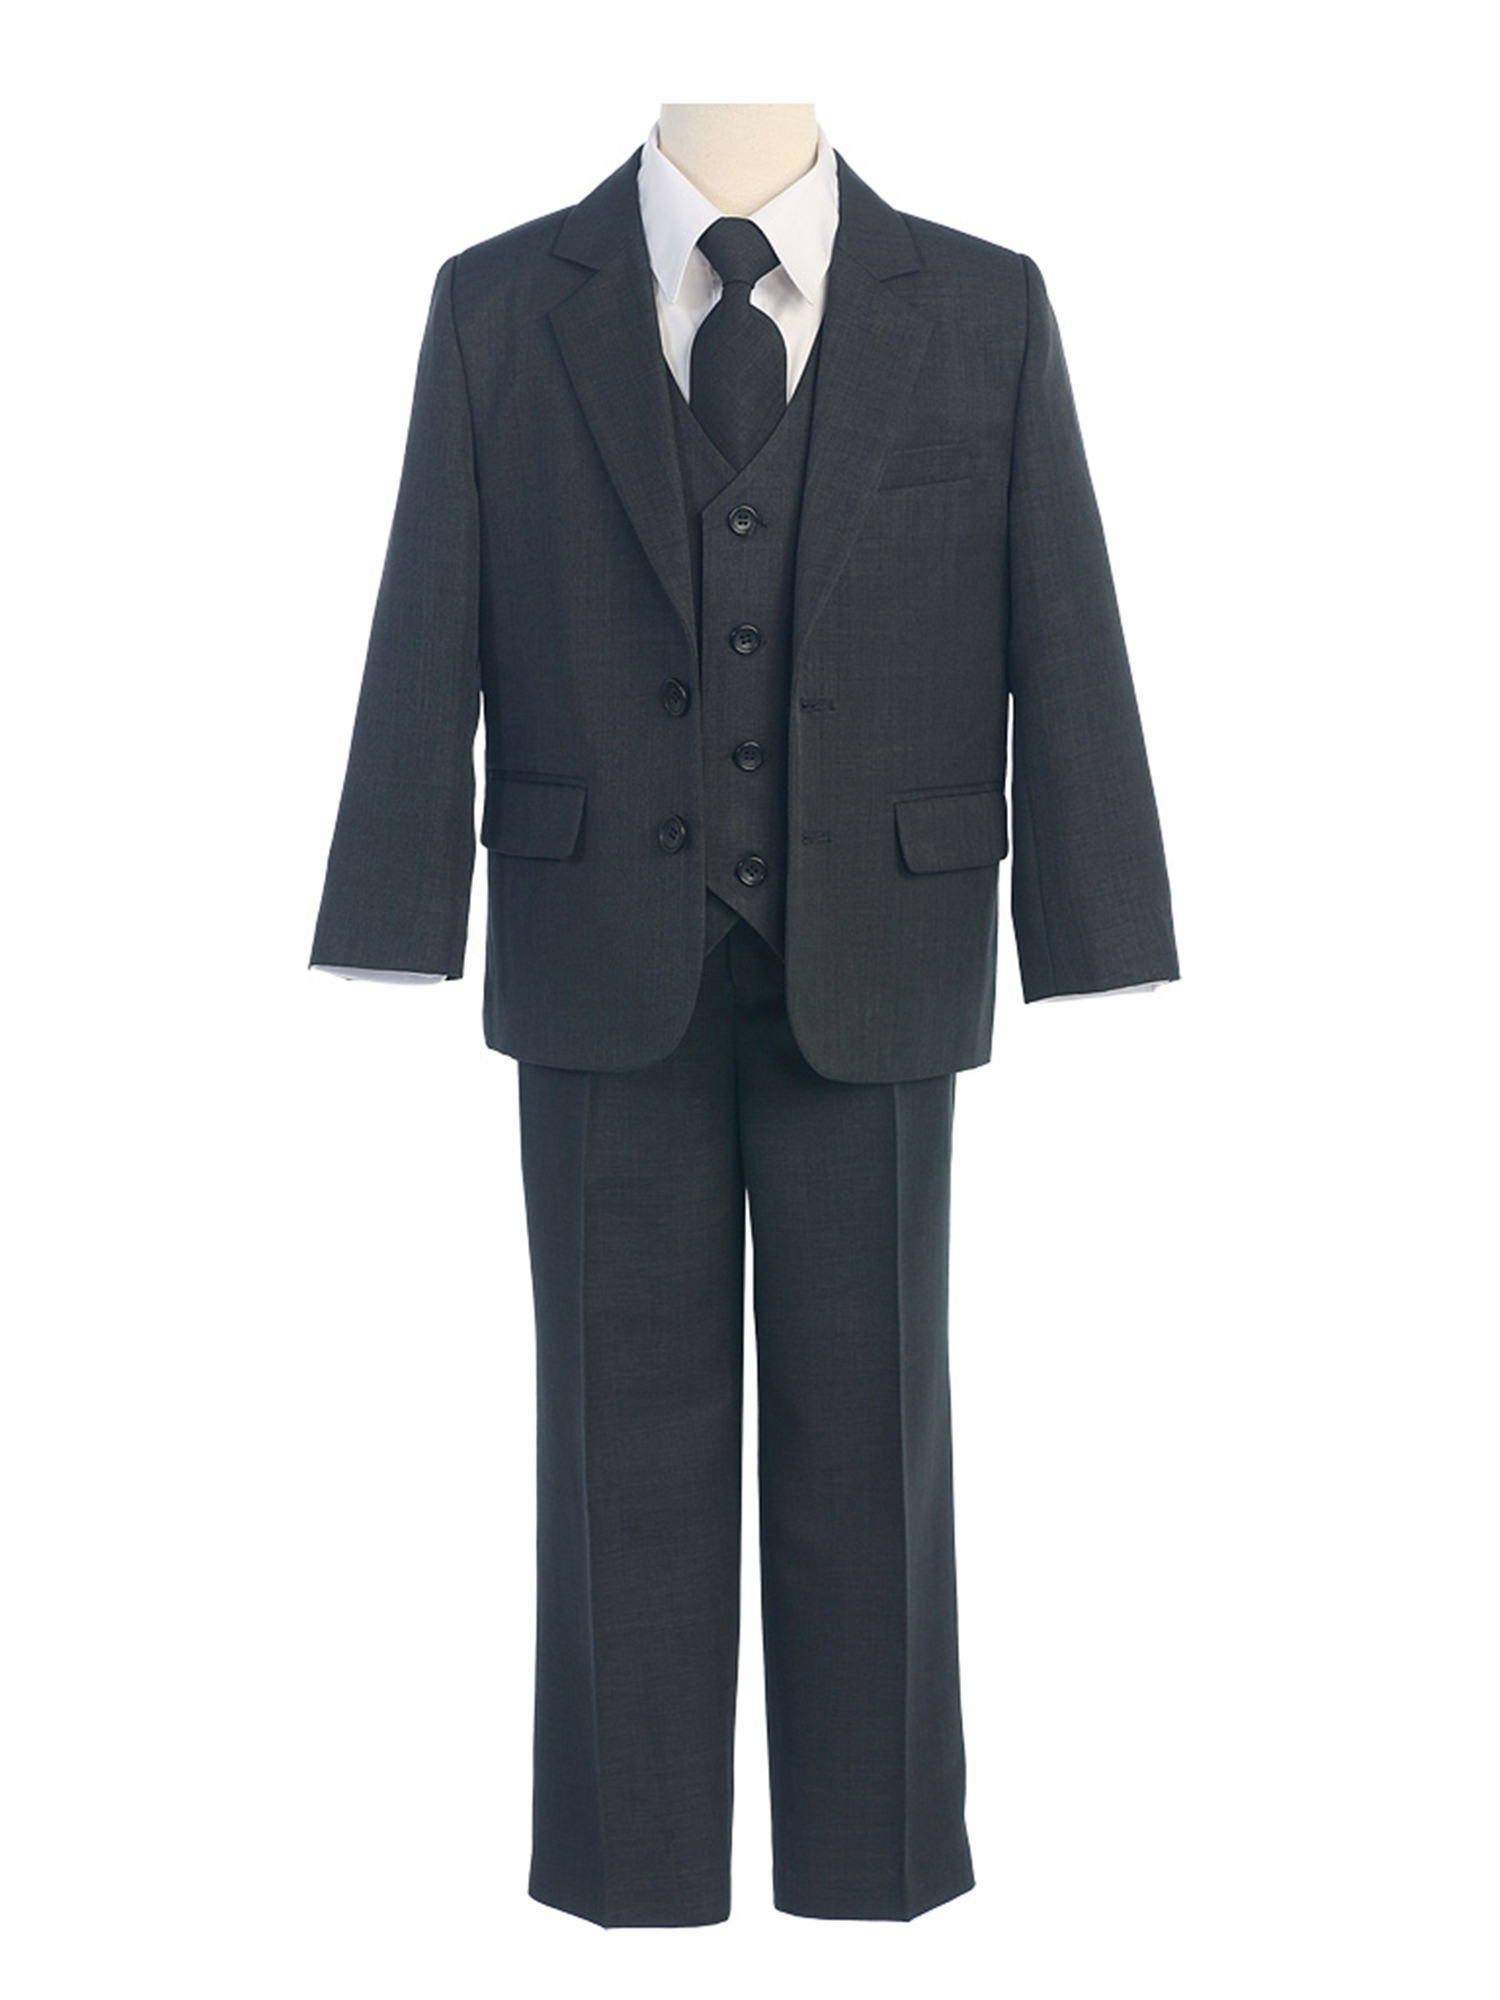 COLE Boys Suit with Shirt and Vest (5-Piece) - (10 Husky, Charcoal Grey)